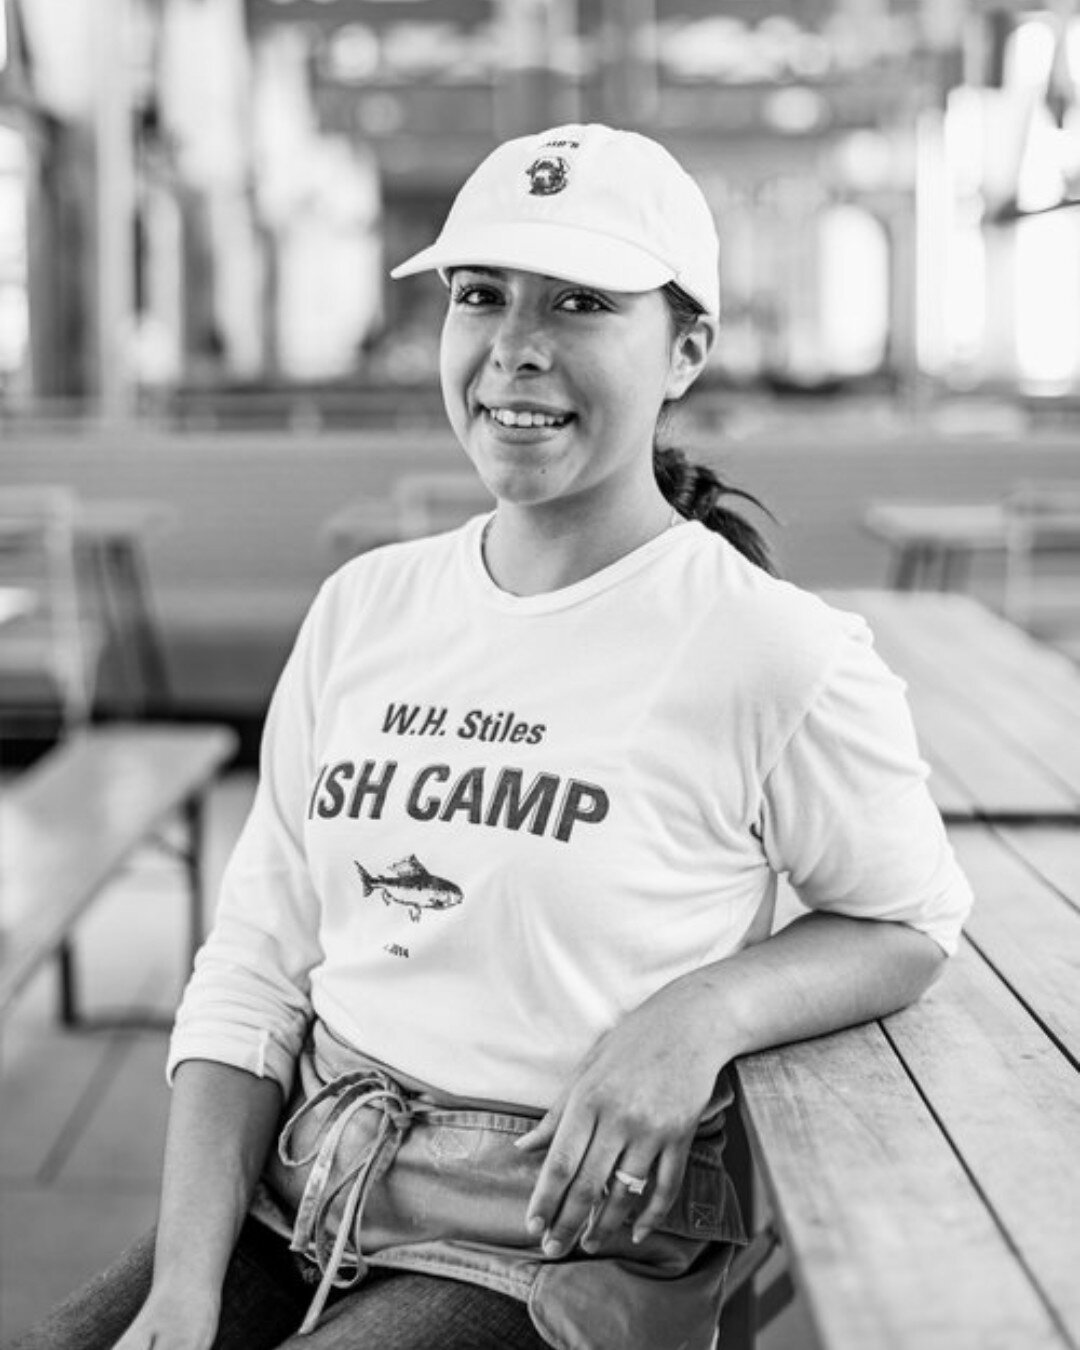 So proud to have people like Tania Vargas on our team. She is the Manager at W. H. Stiles Fish Camp at @poncecitymarket!